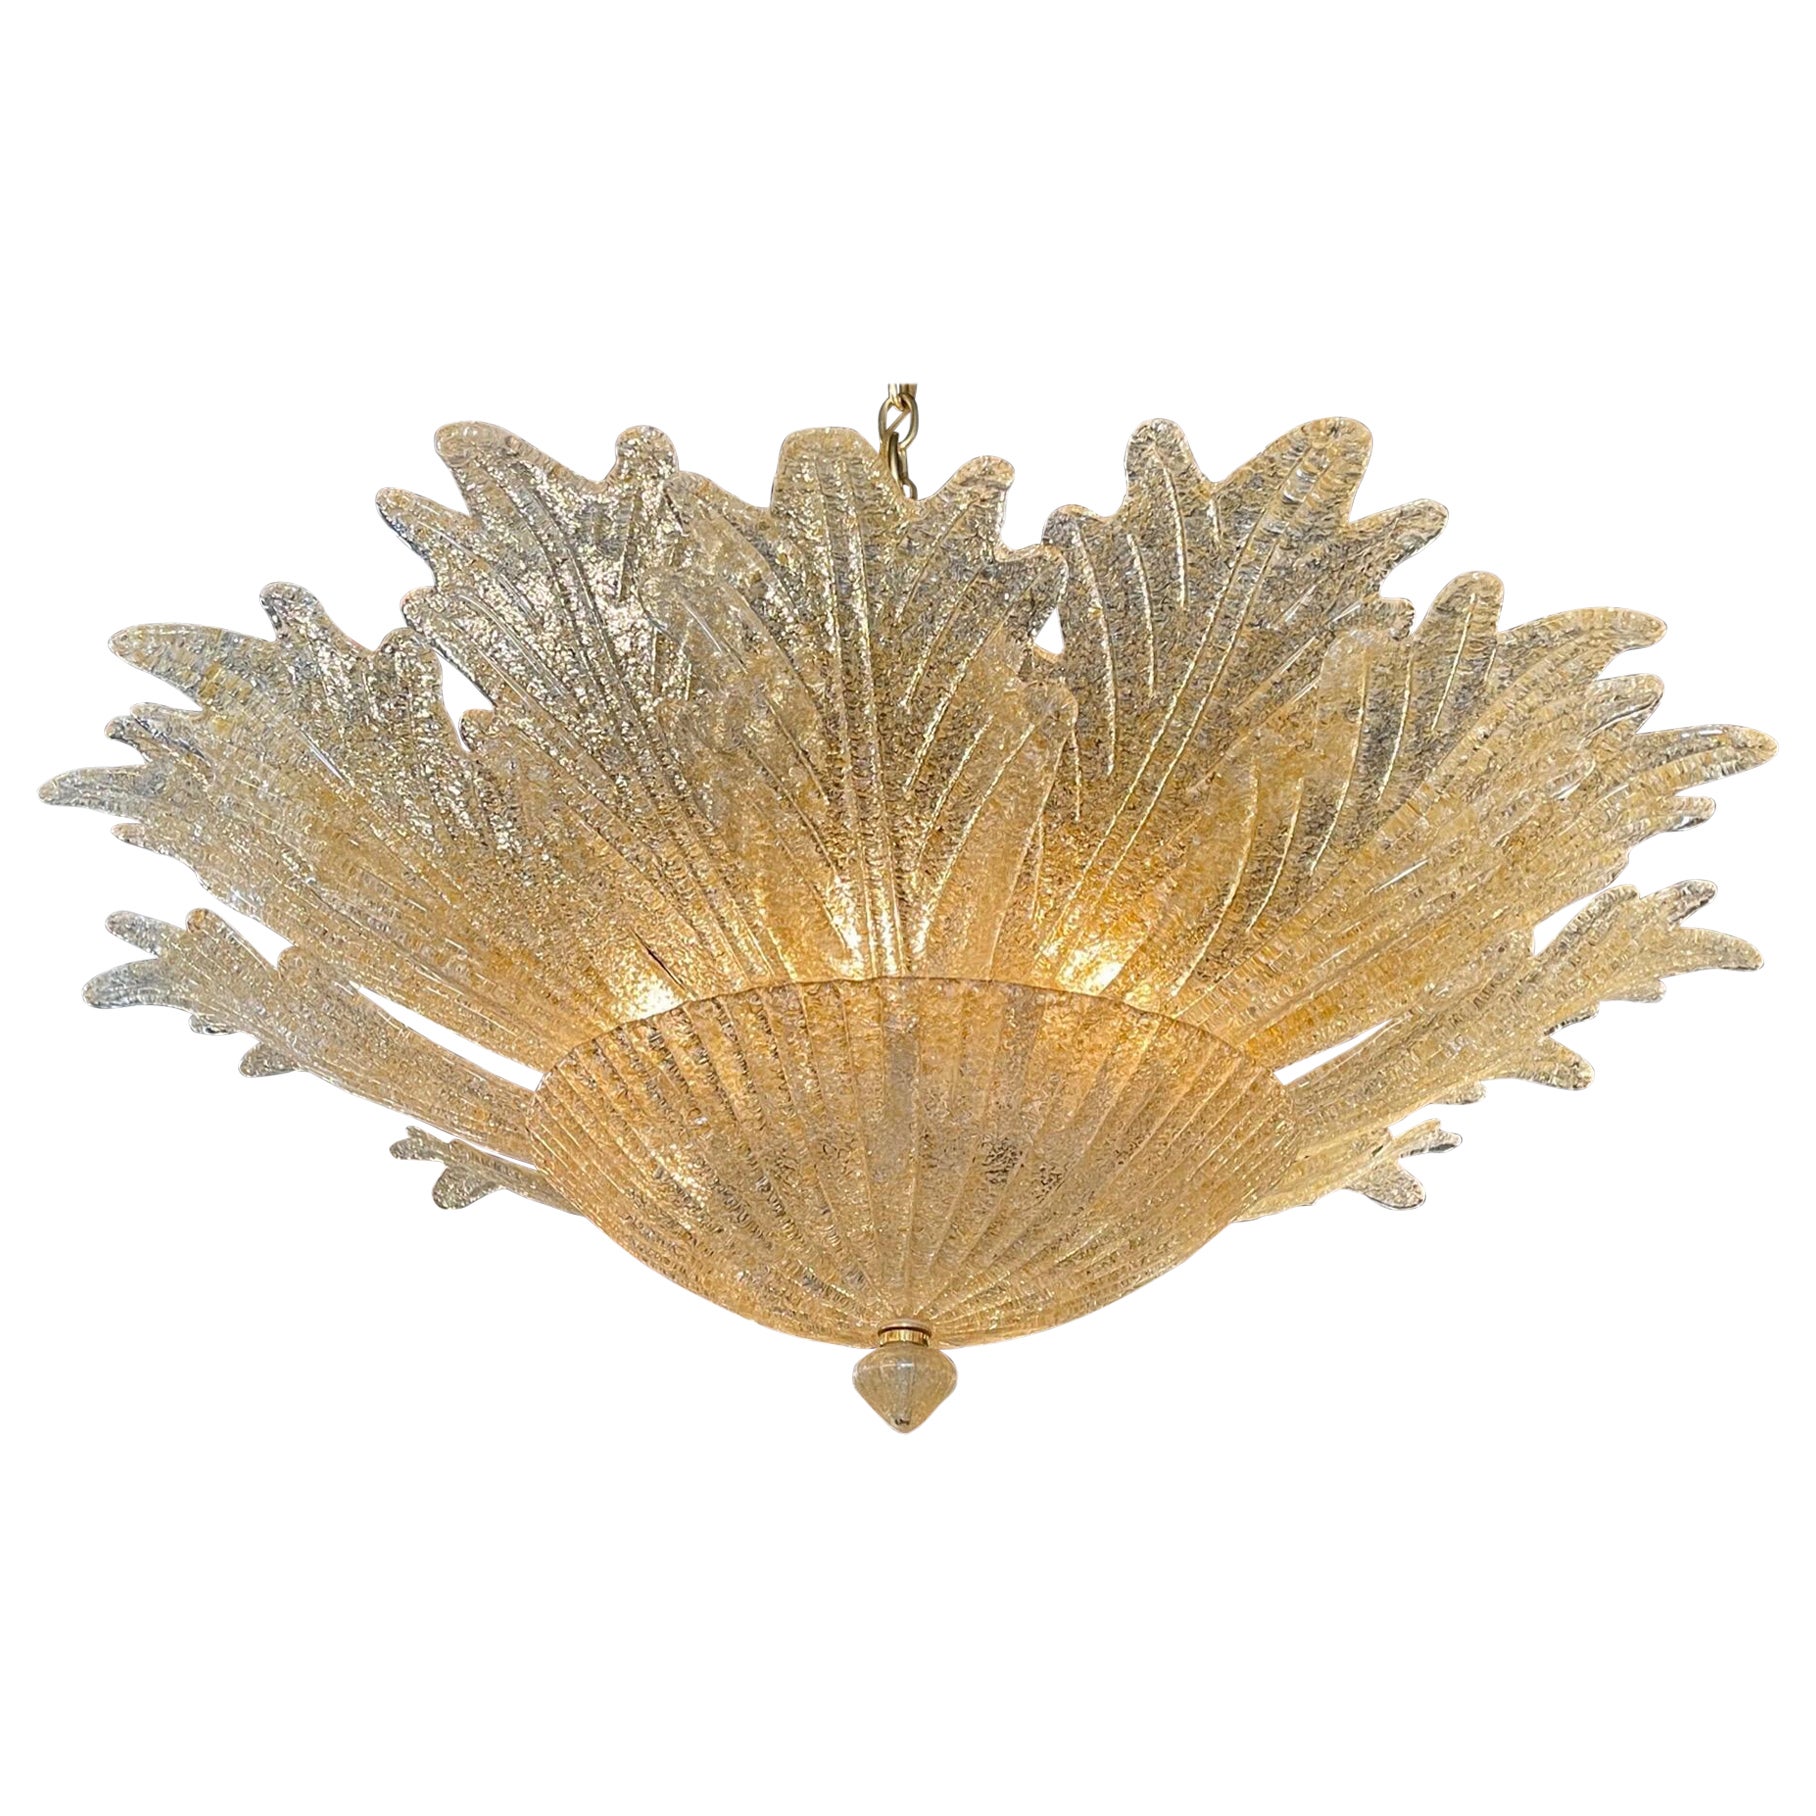 Murano Glass Gold Flecked Leaf Form Ceiling Mount Fixture